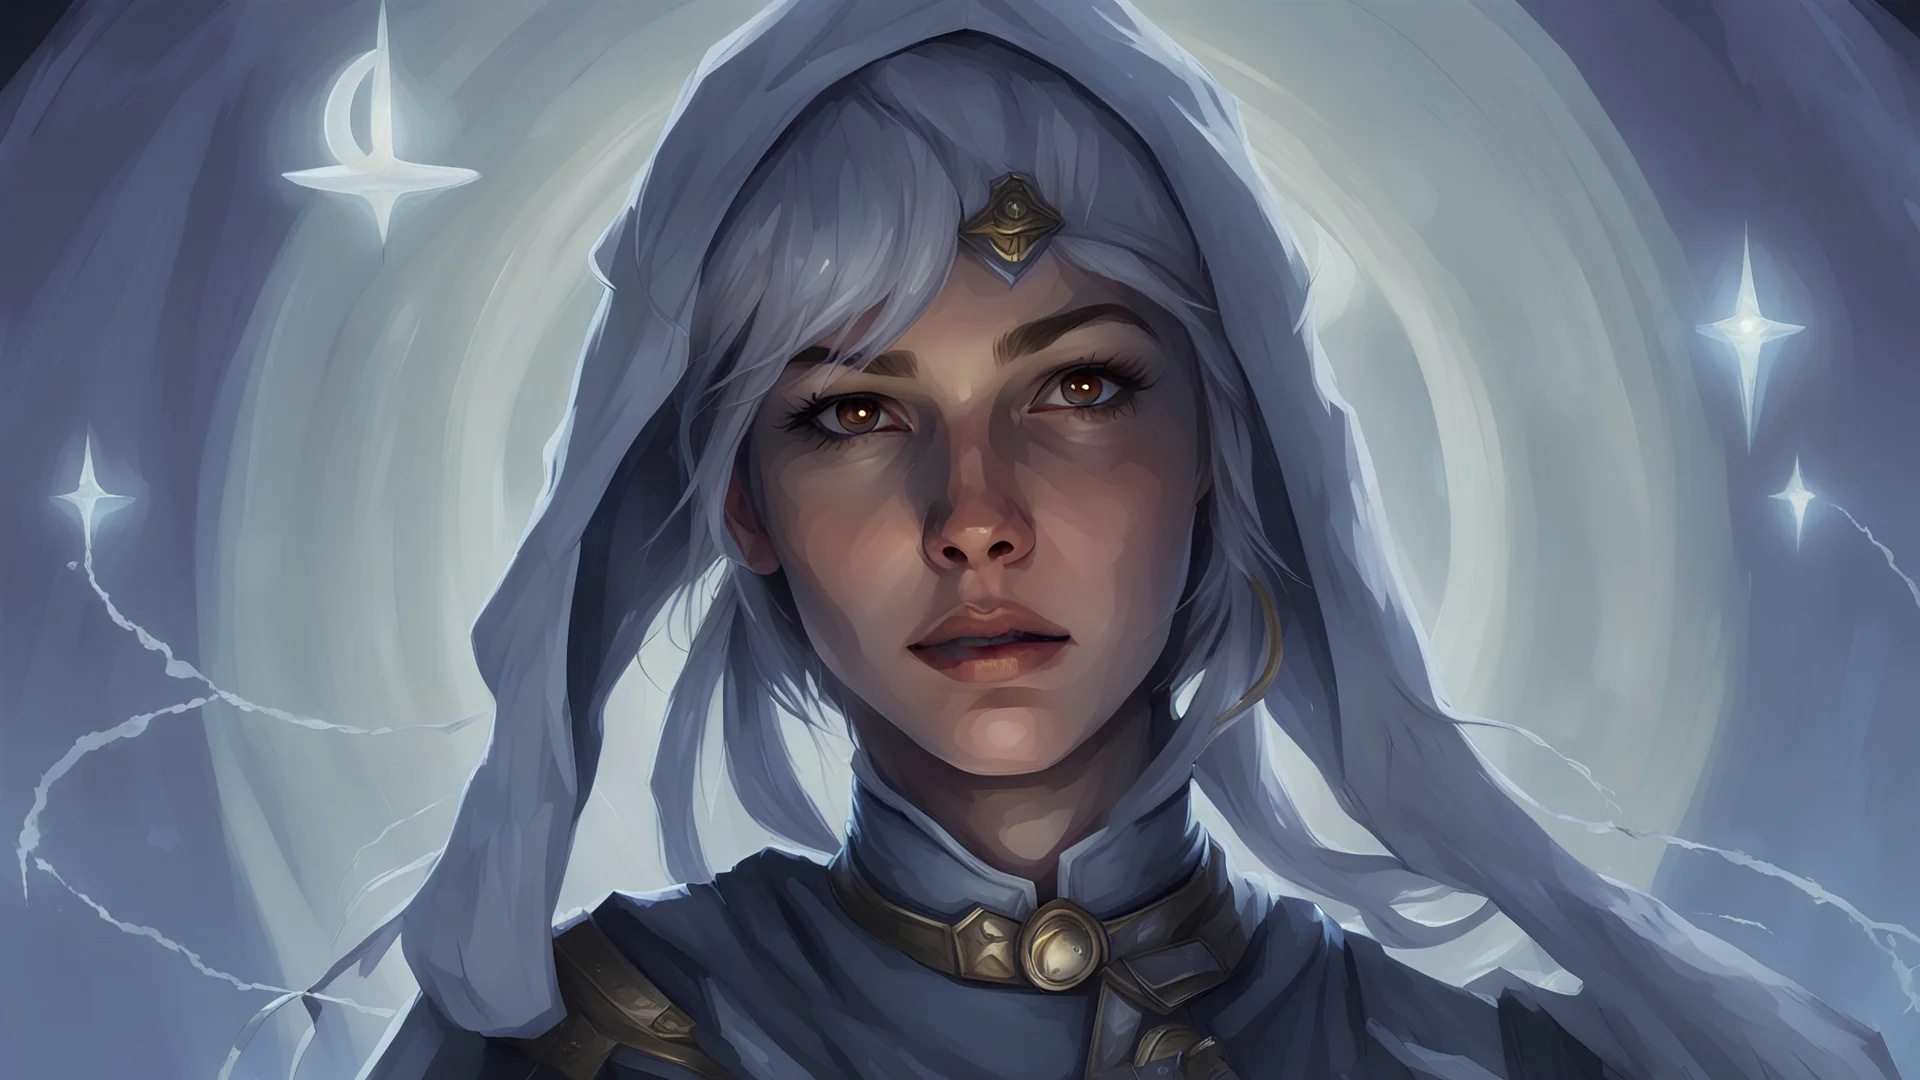 Generate a dungeons and dragons character portrait of a female elf who is a cleric of the moon and is surrounded by holy light